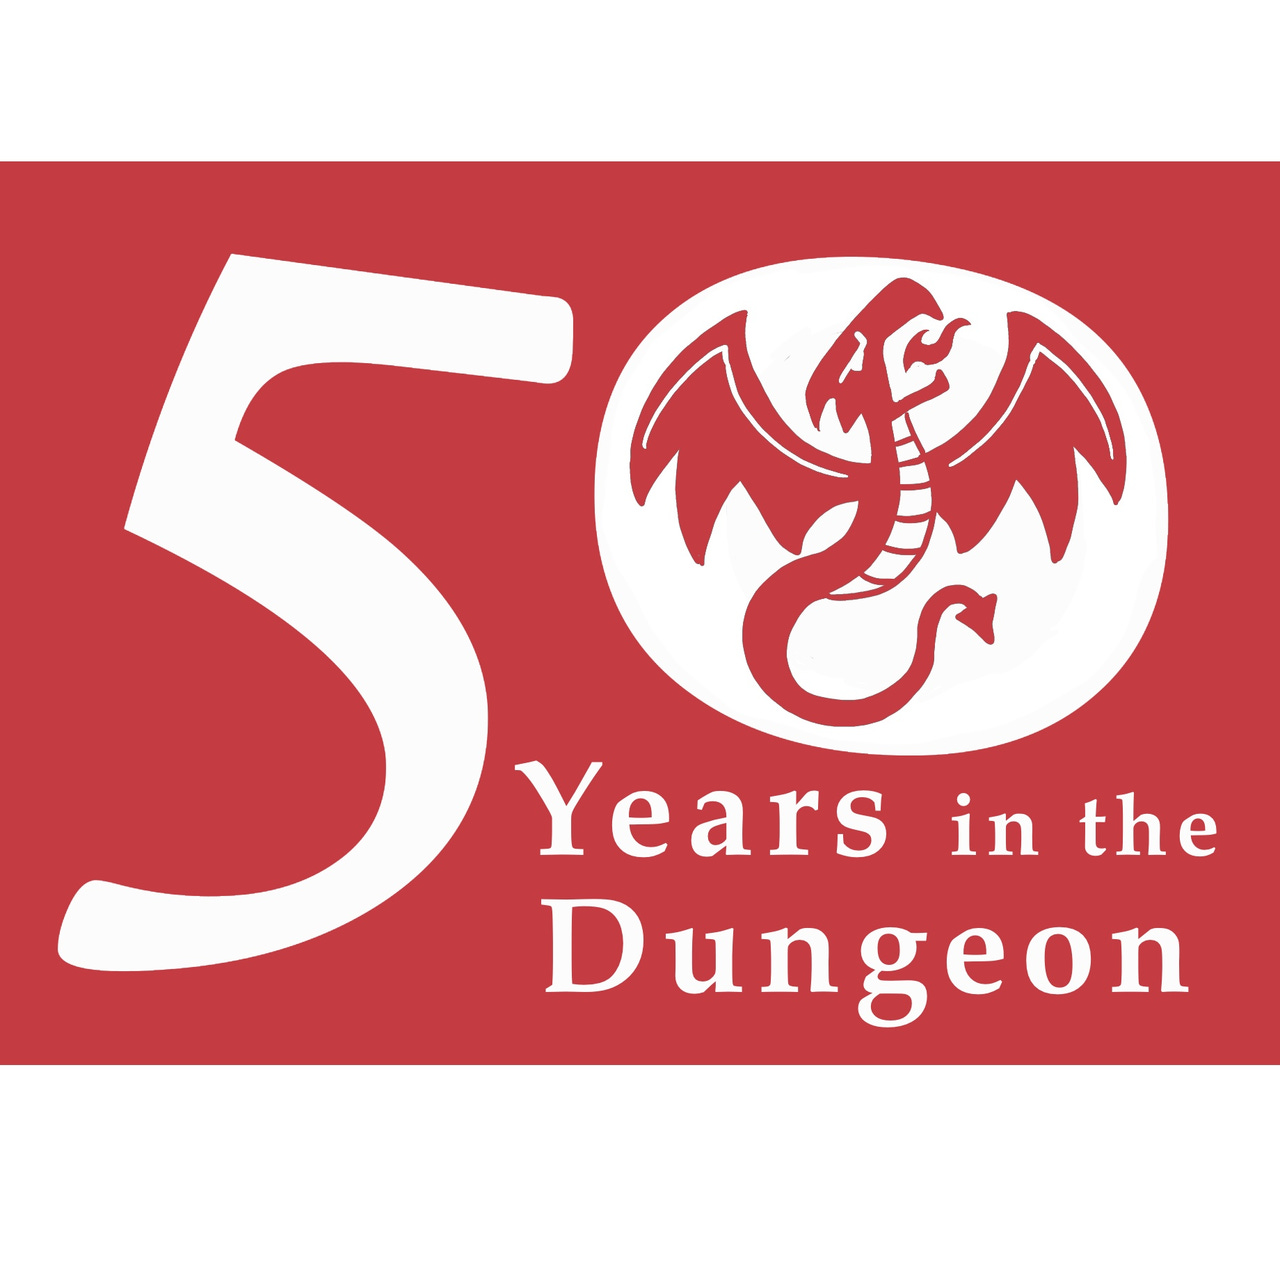 50 Years in the Dungeon